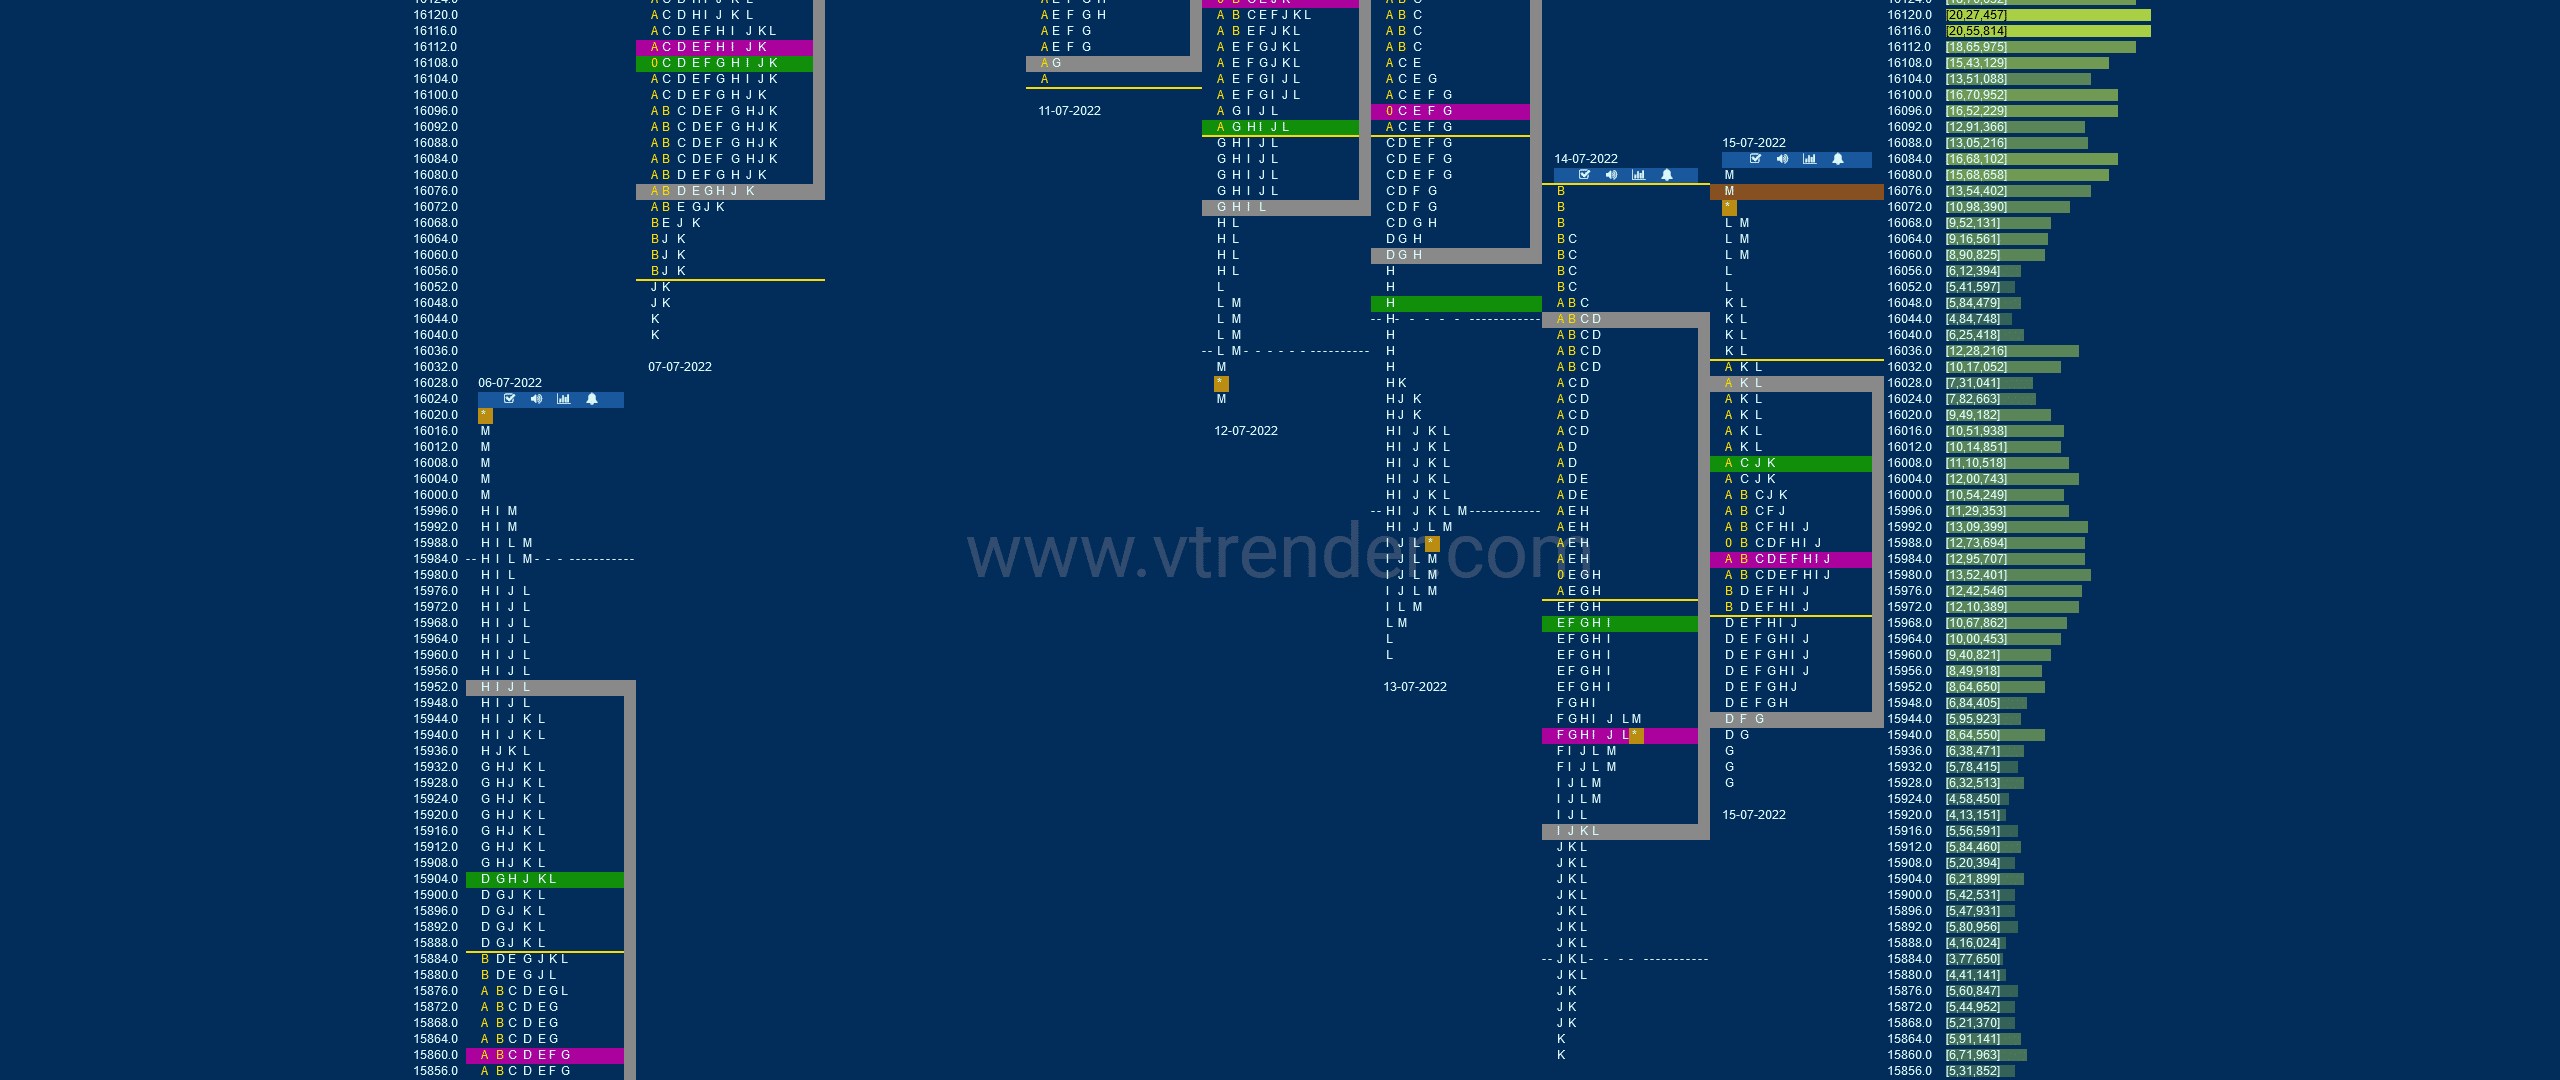 Nf 11 Market Profile Analysis Dated 15Th Jul 2022 Banknifty Futures, Charts, Day Trading, Intraday Trading, Intraday Trading Strategies, Market Profile, Market Profile Trading Strategies, Nifty Futures, Order Flow Analysis, Support And Resistance, Technical Analysis, Trading Strategies, Volume Profile Trading